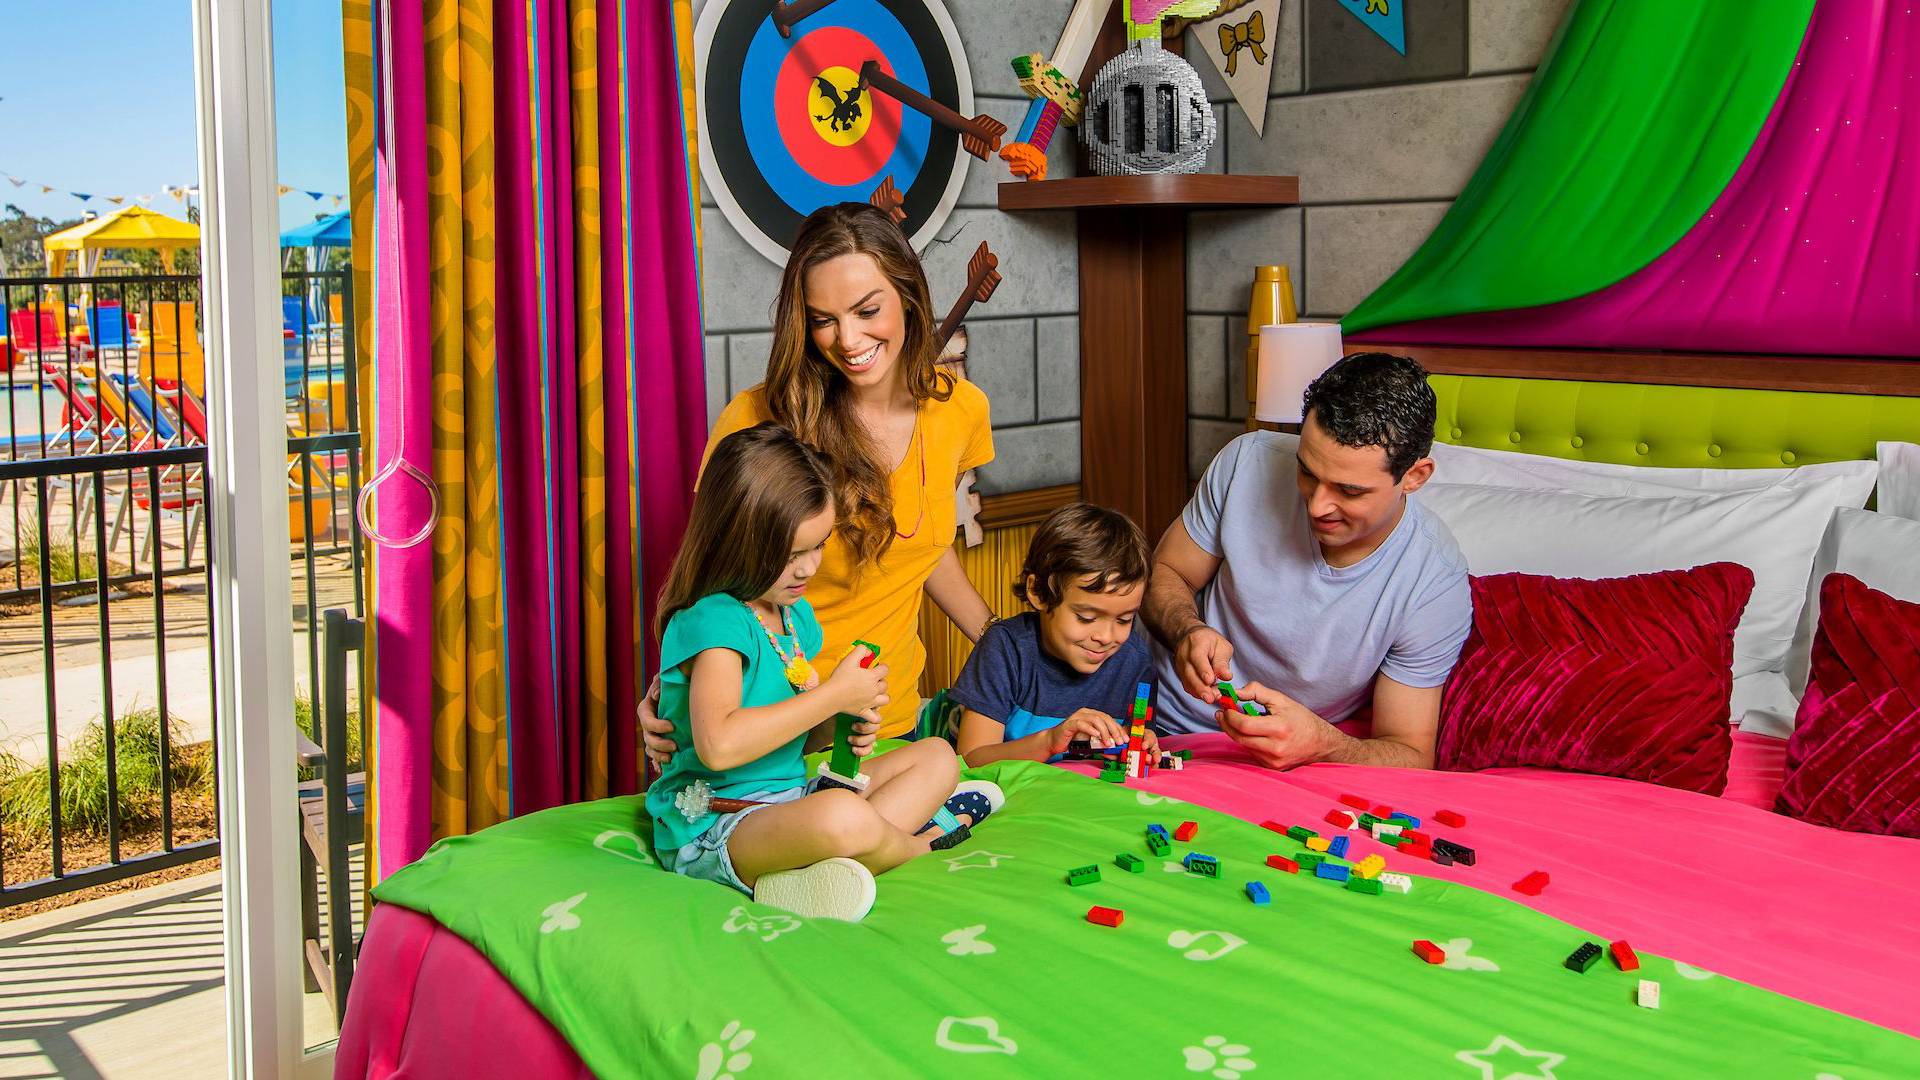 Family Plays with LEGO in a Princess Themed Patio Room